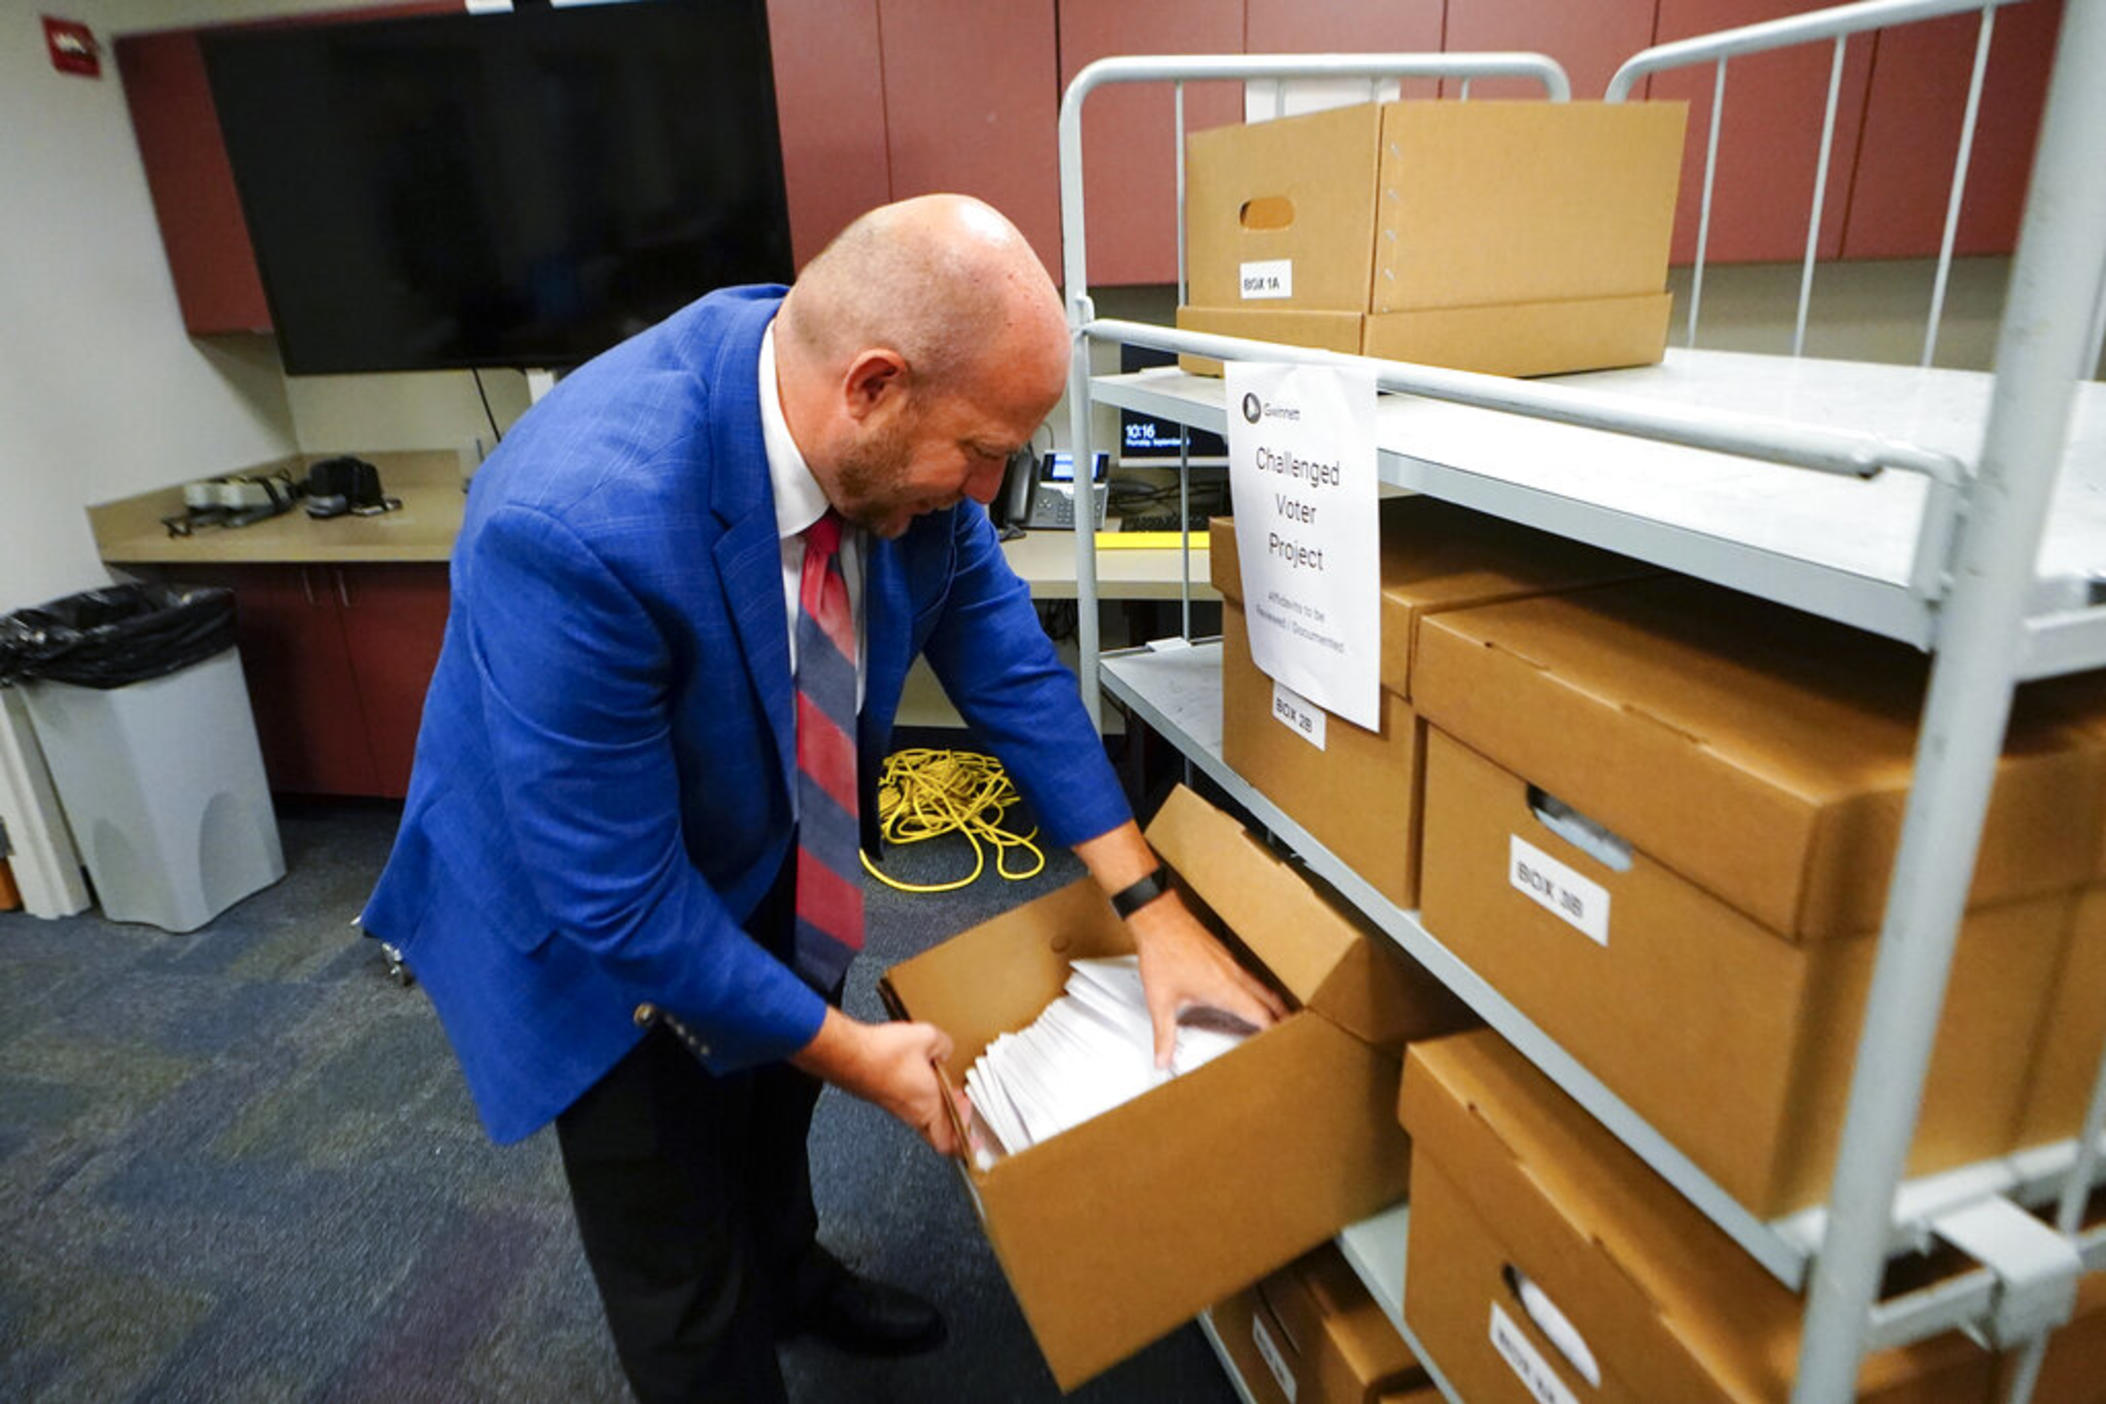 Gwinnett County elections supervisor Zach Manifold looks over boxes of voter challenges on Thursday, Sept. 15, 2022, in Lawrenceville, Ga. Manifold estimated his office has a month to log and research the challenges, before mail ballots go out for the November elections. “It is a tight window to get everything done,” he said.